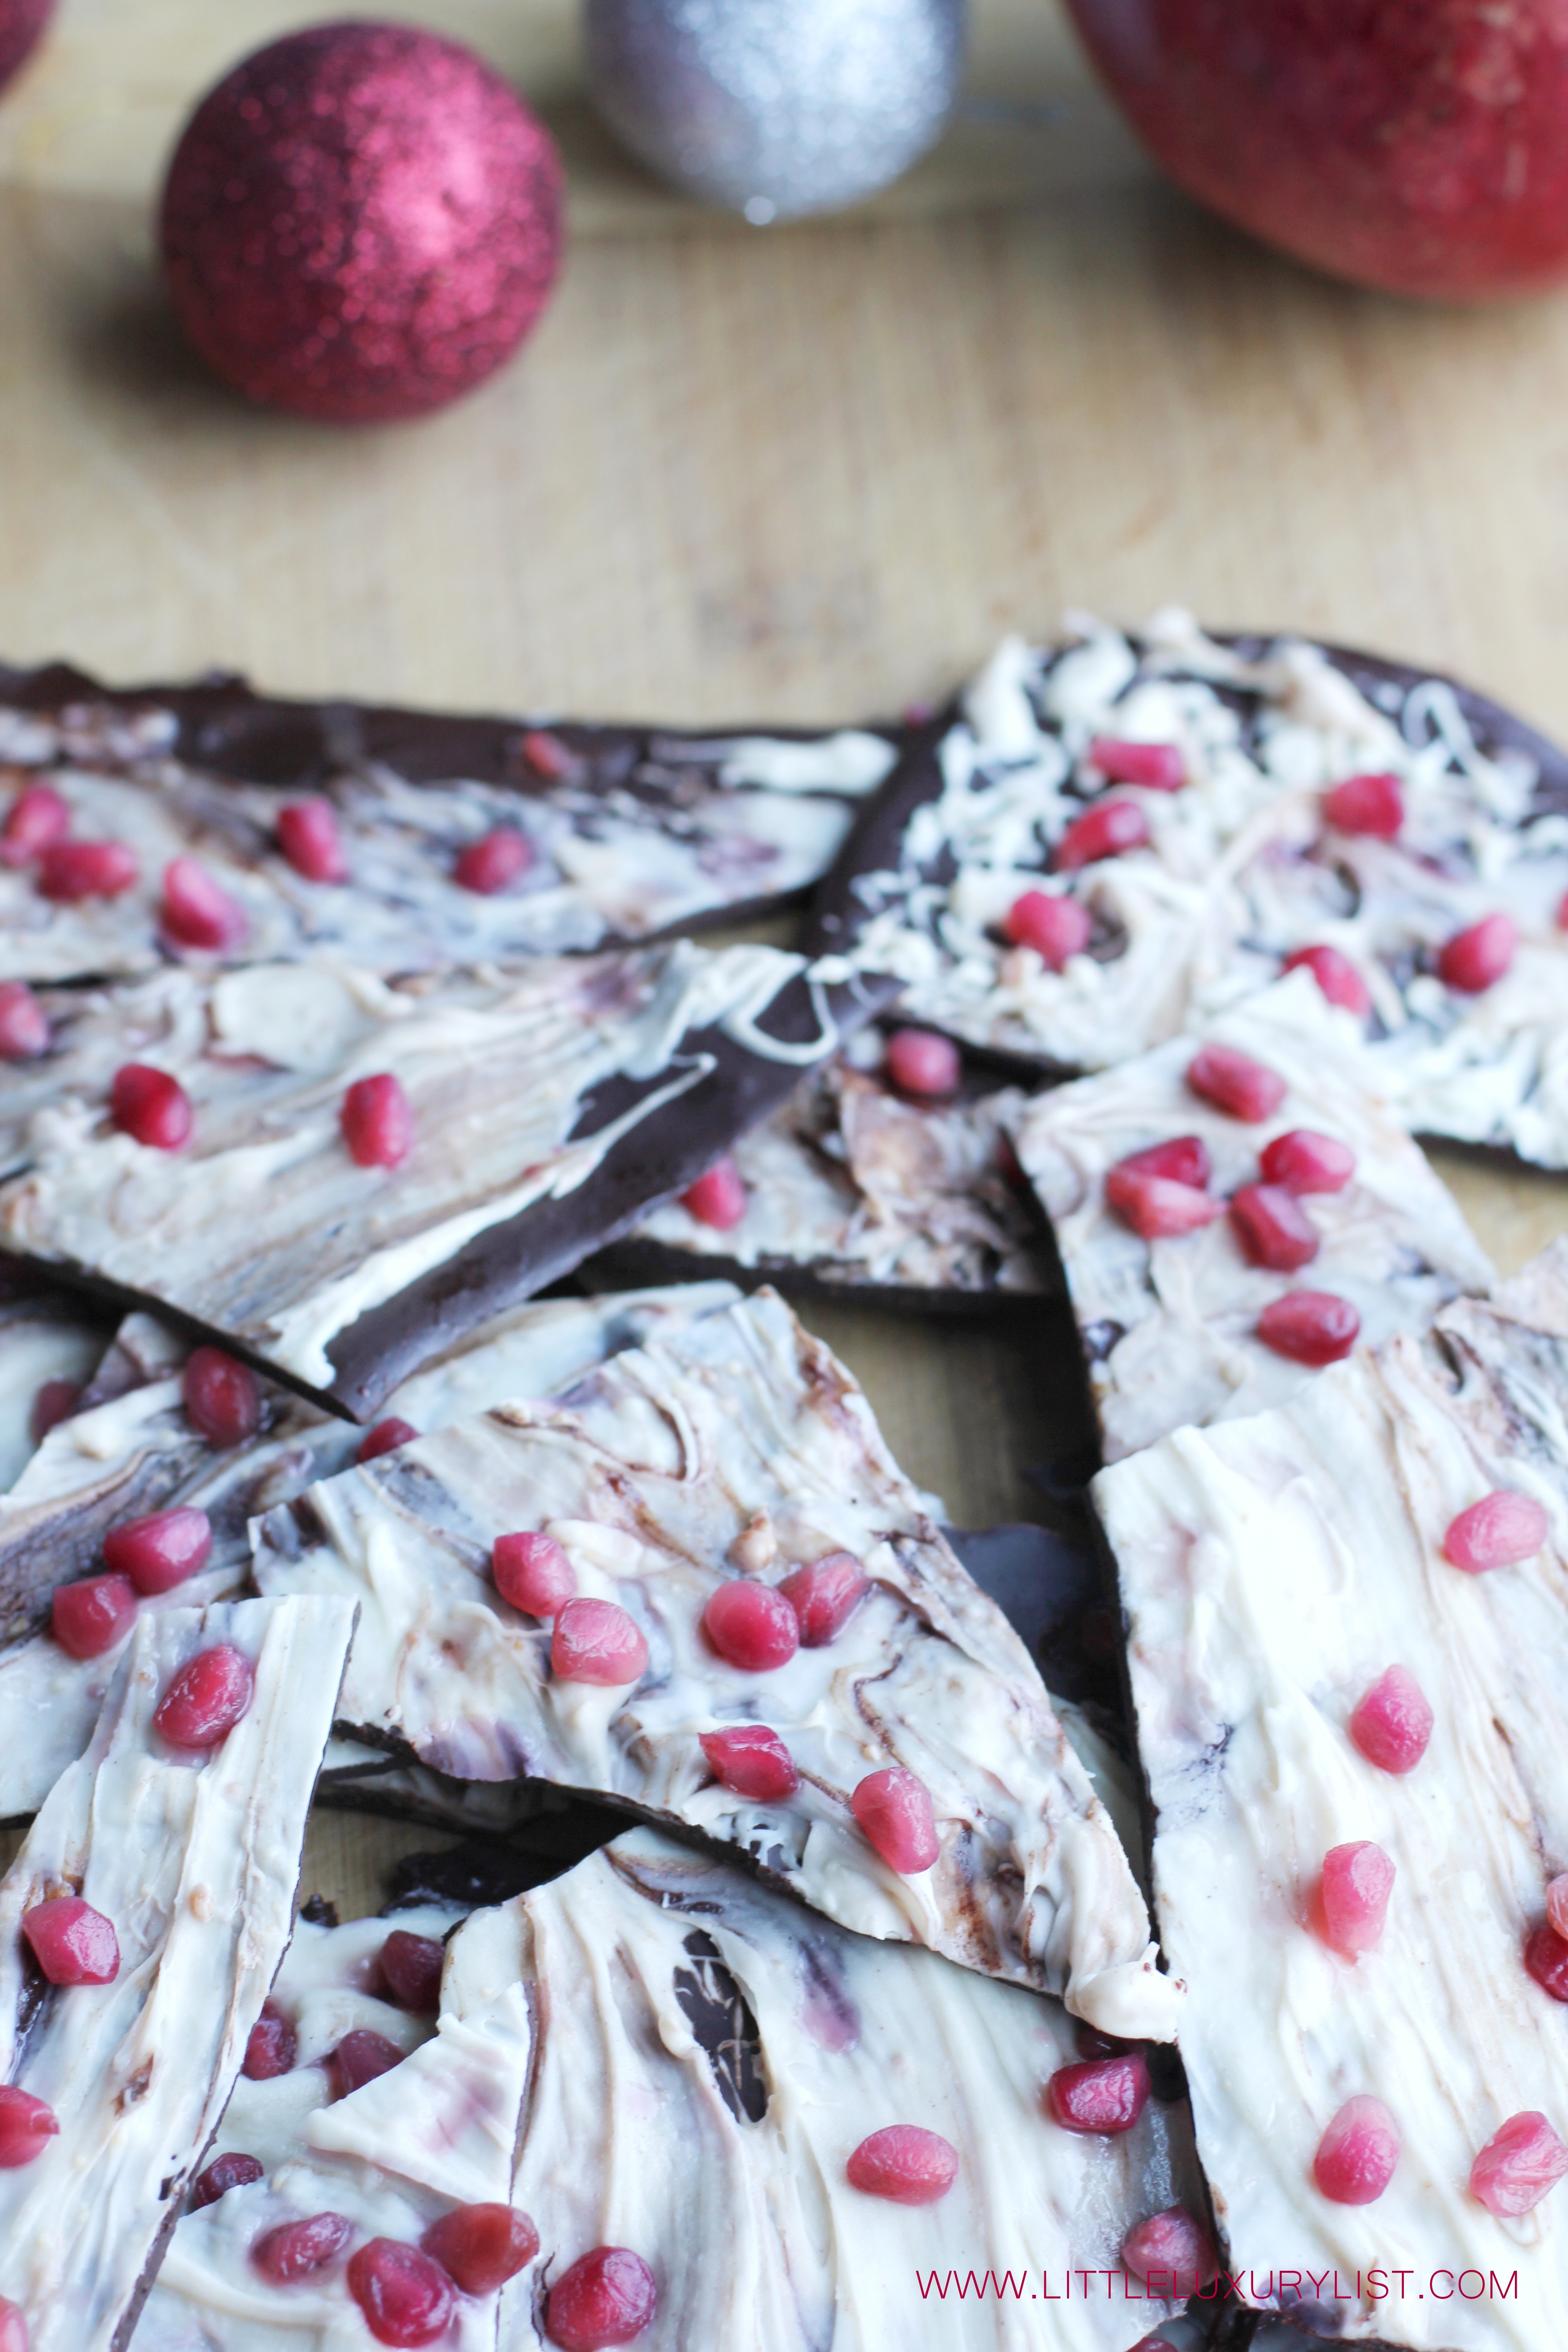 Pomegranate chocolate bark red and silver balls by little luxury list